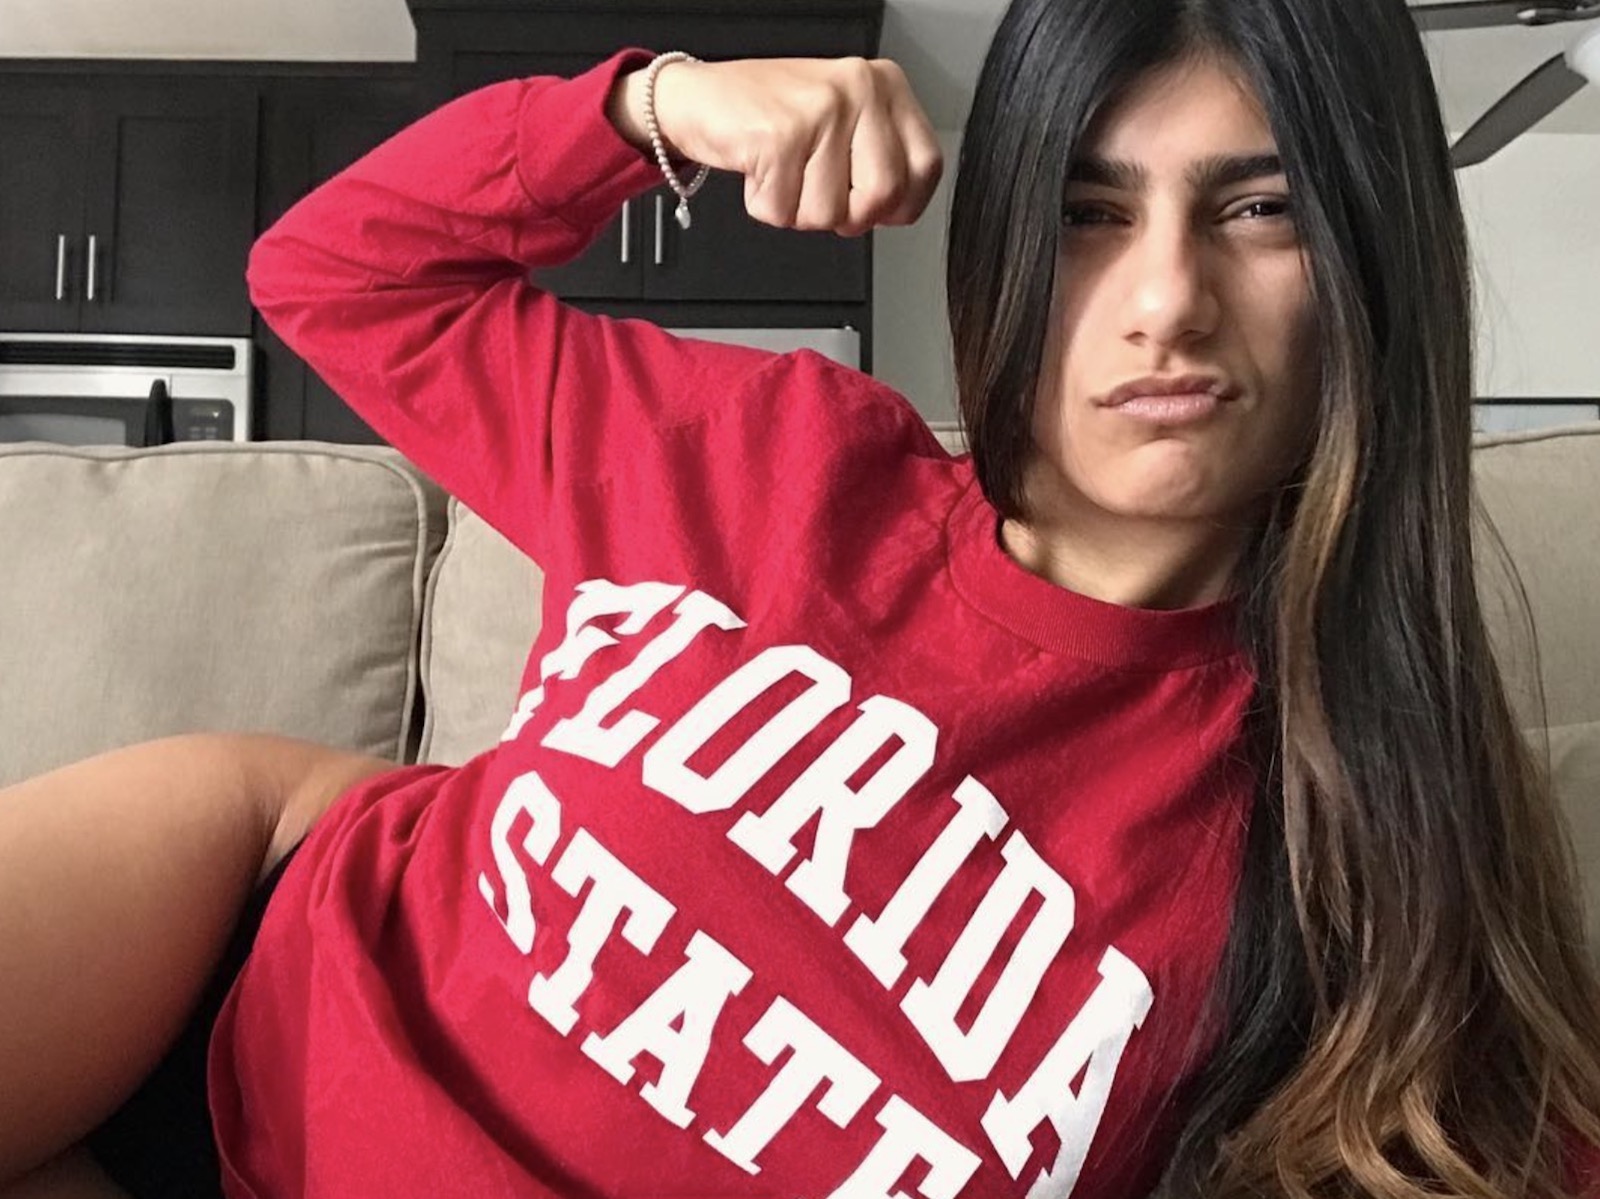 Life After Pornhub What Is Mia Khalifa Up To Now Film Daily